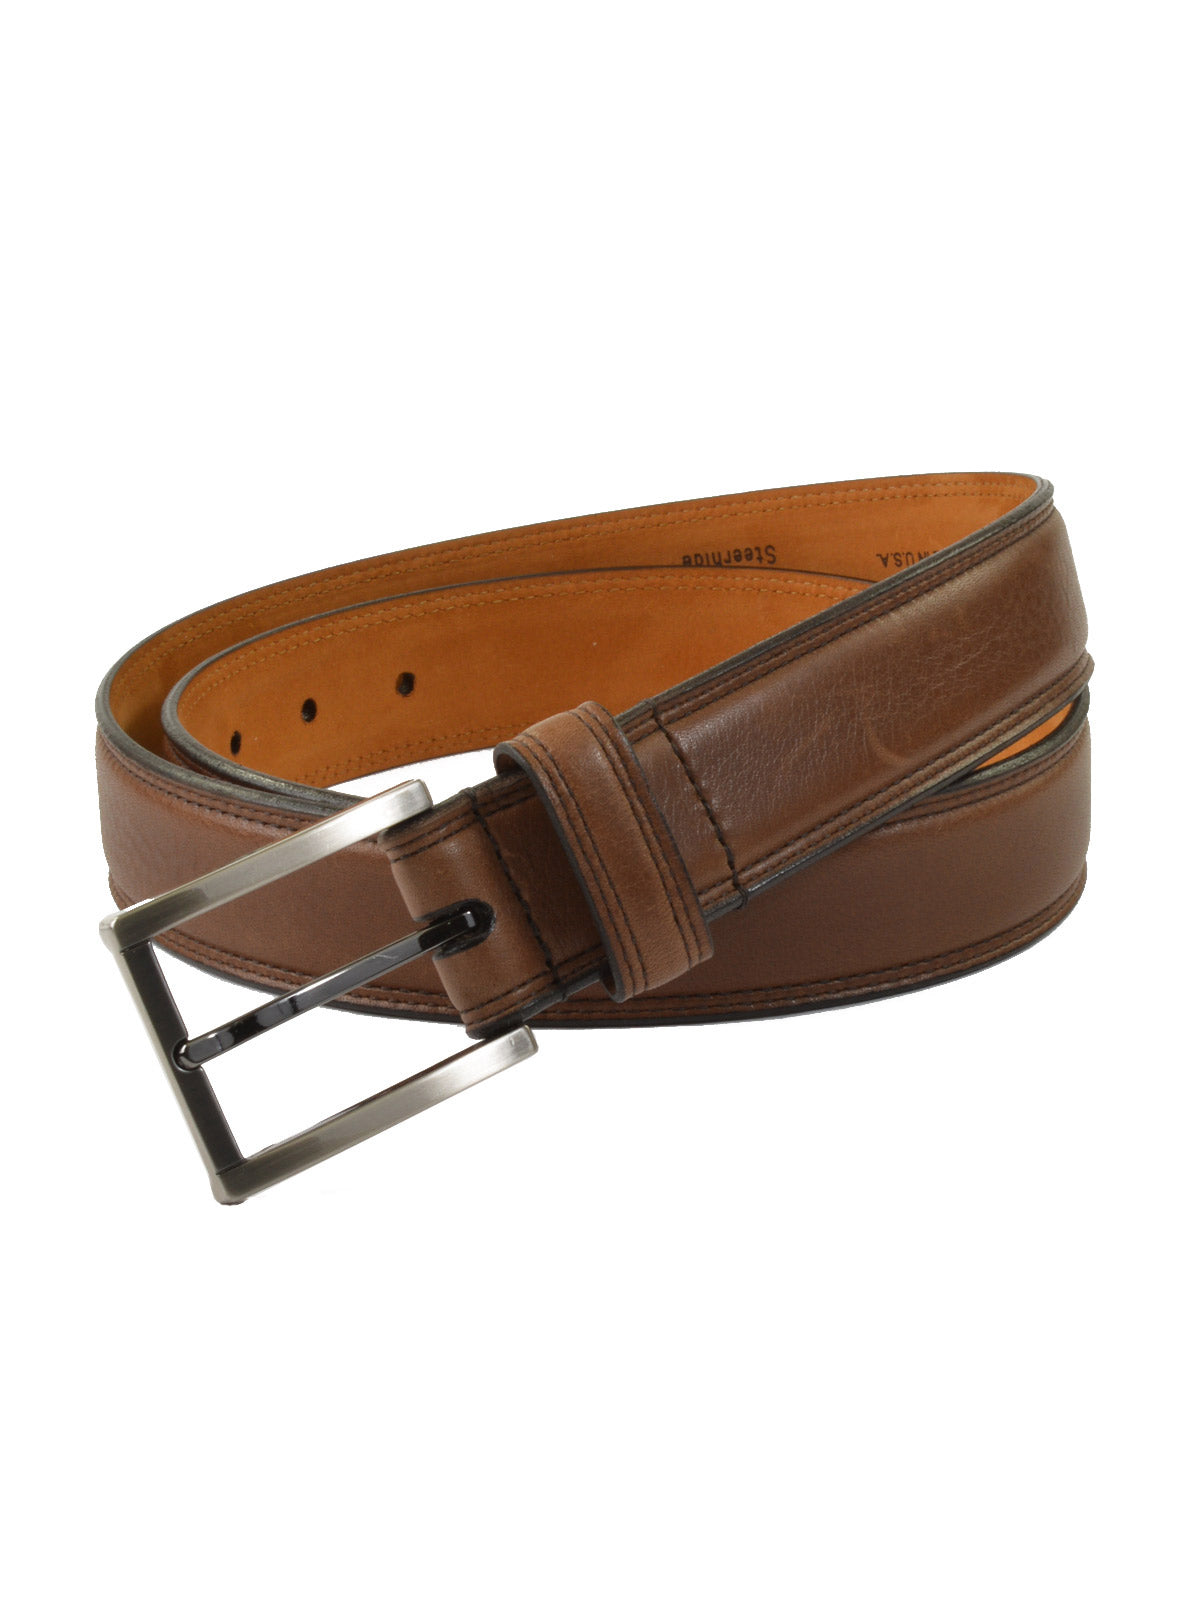 Lejon Glove Tanned Leather Dignitary Belts in Brown - Big Man Sizes